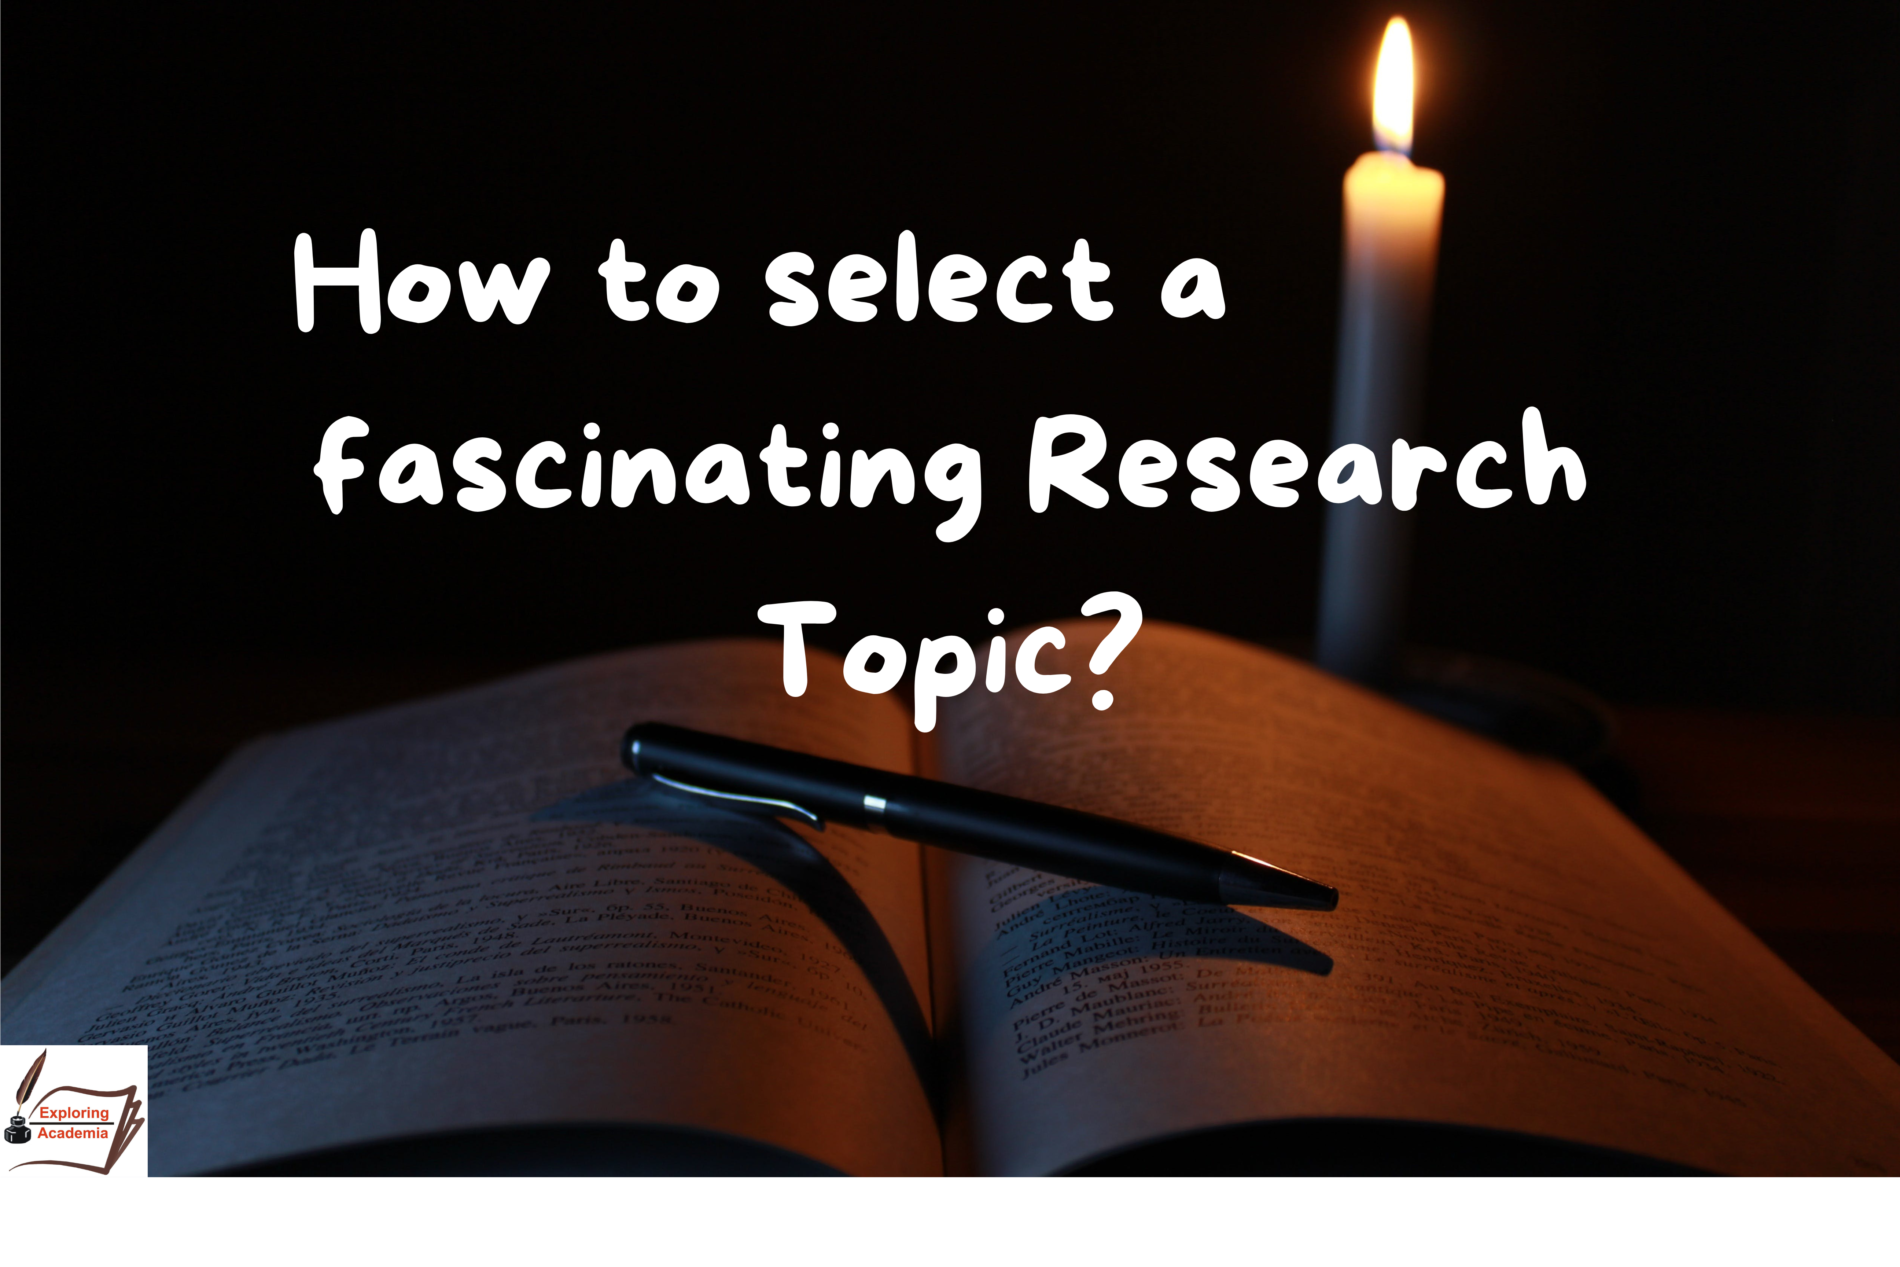 How to select a fascinating research topic